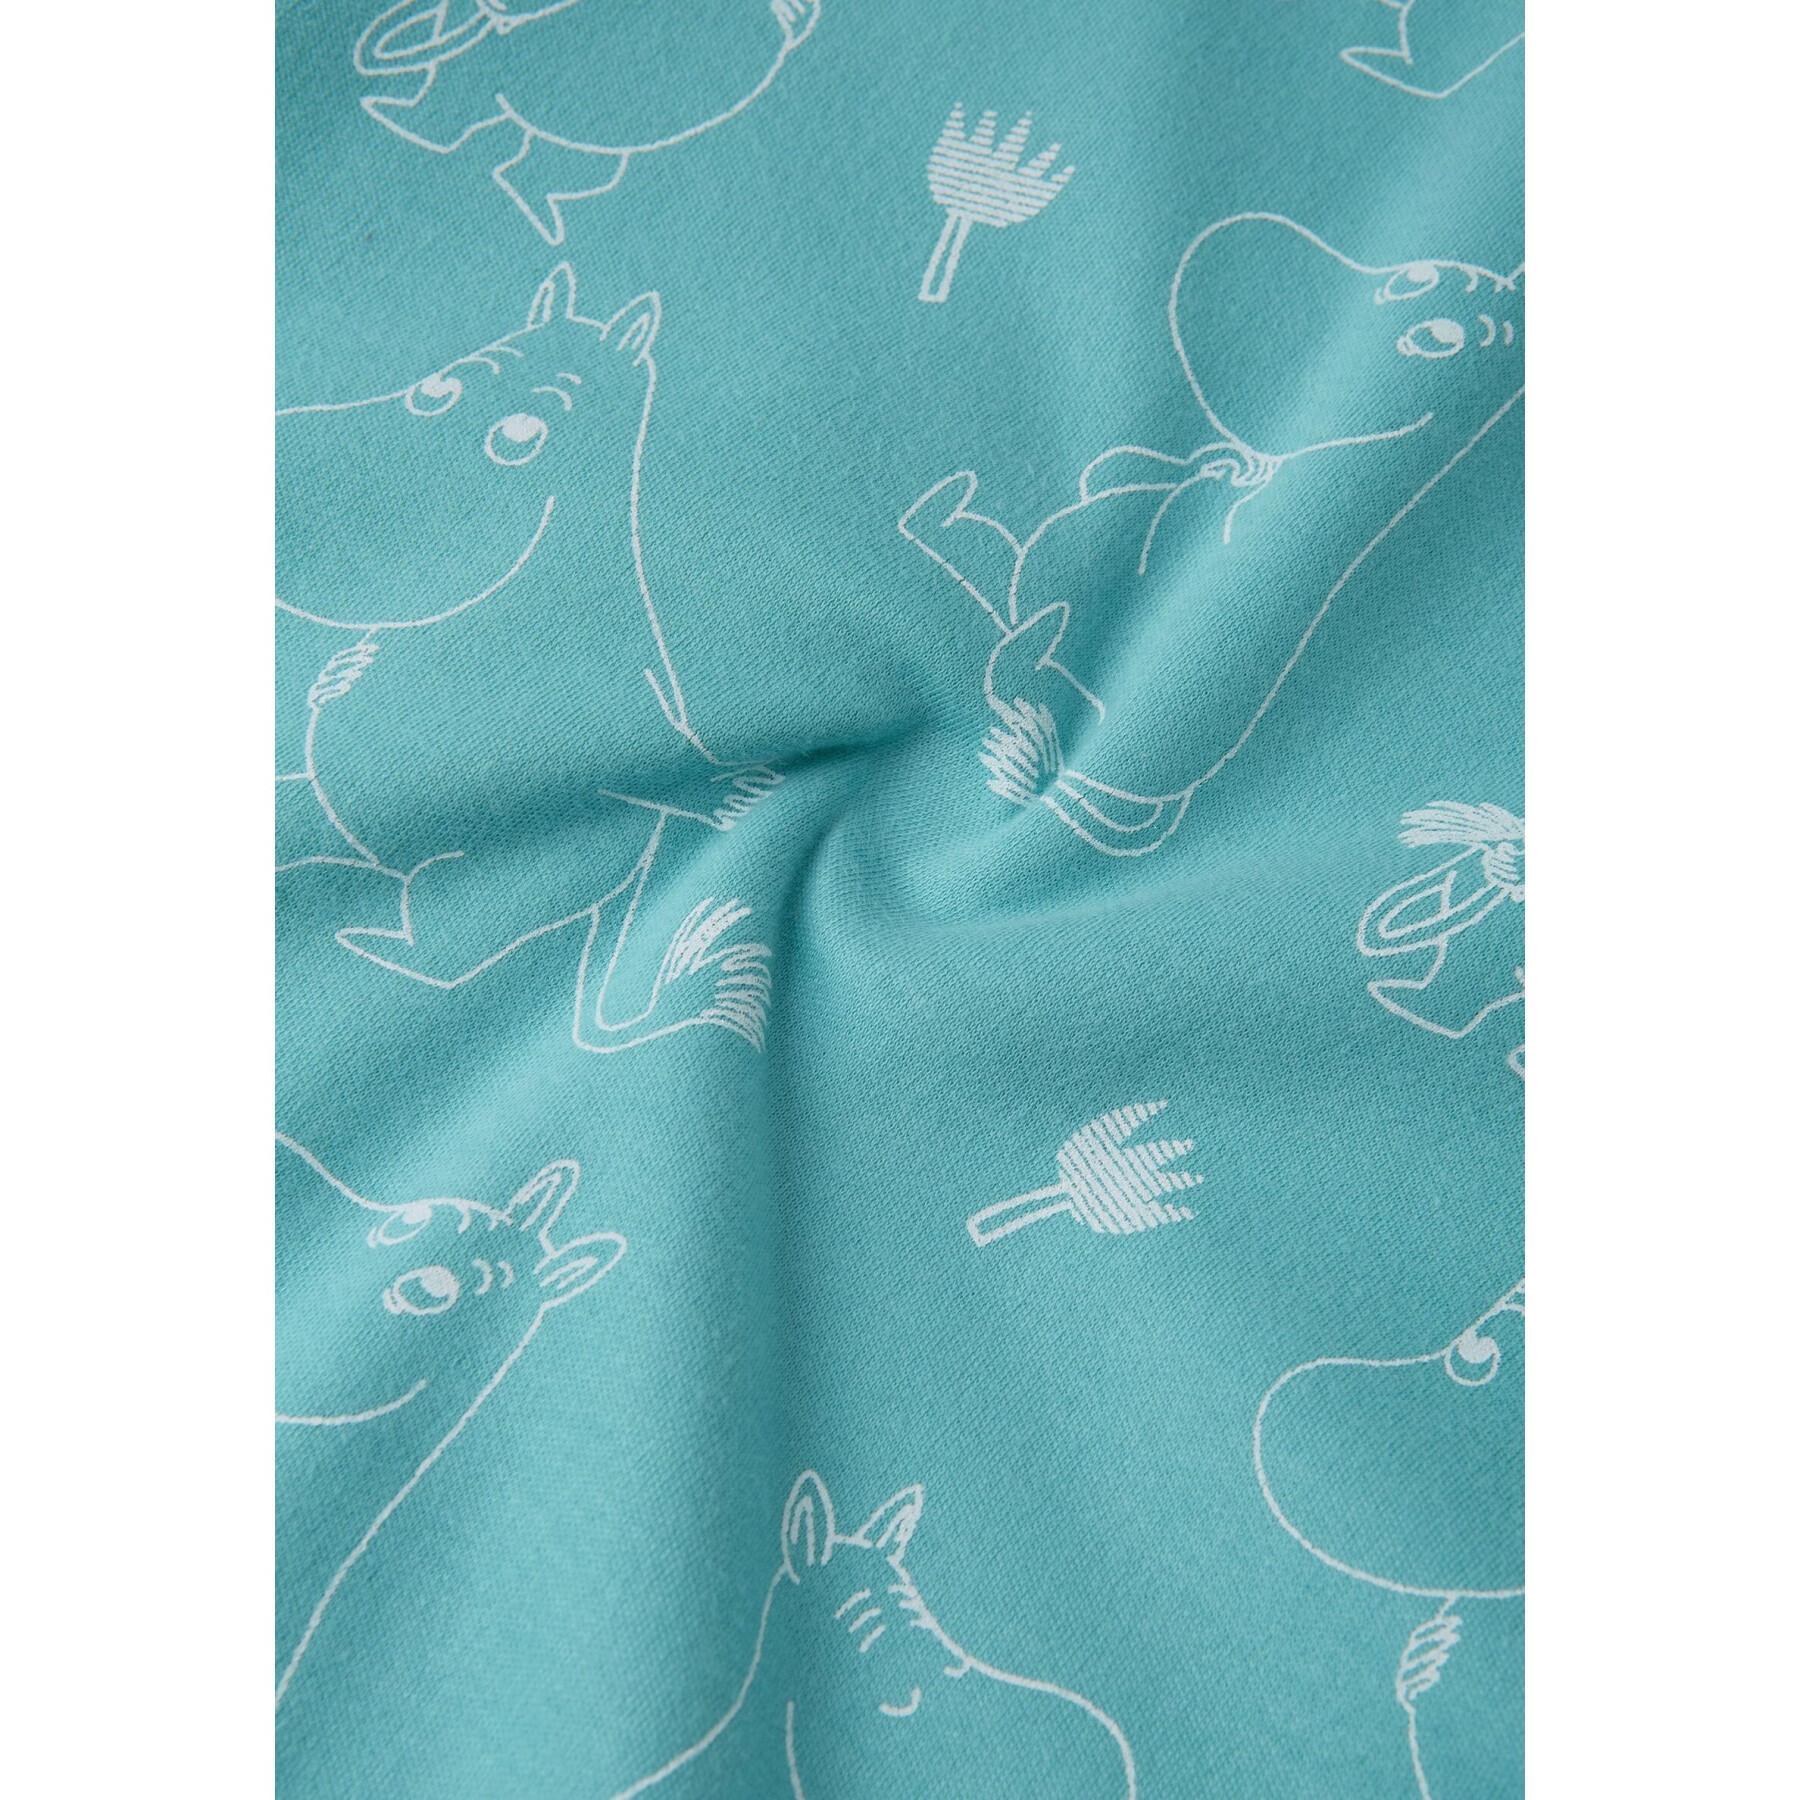 Baby suit Reima Moomin Sovare